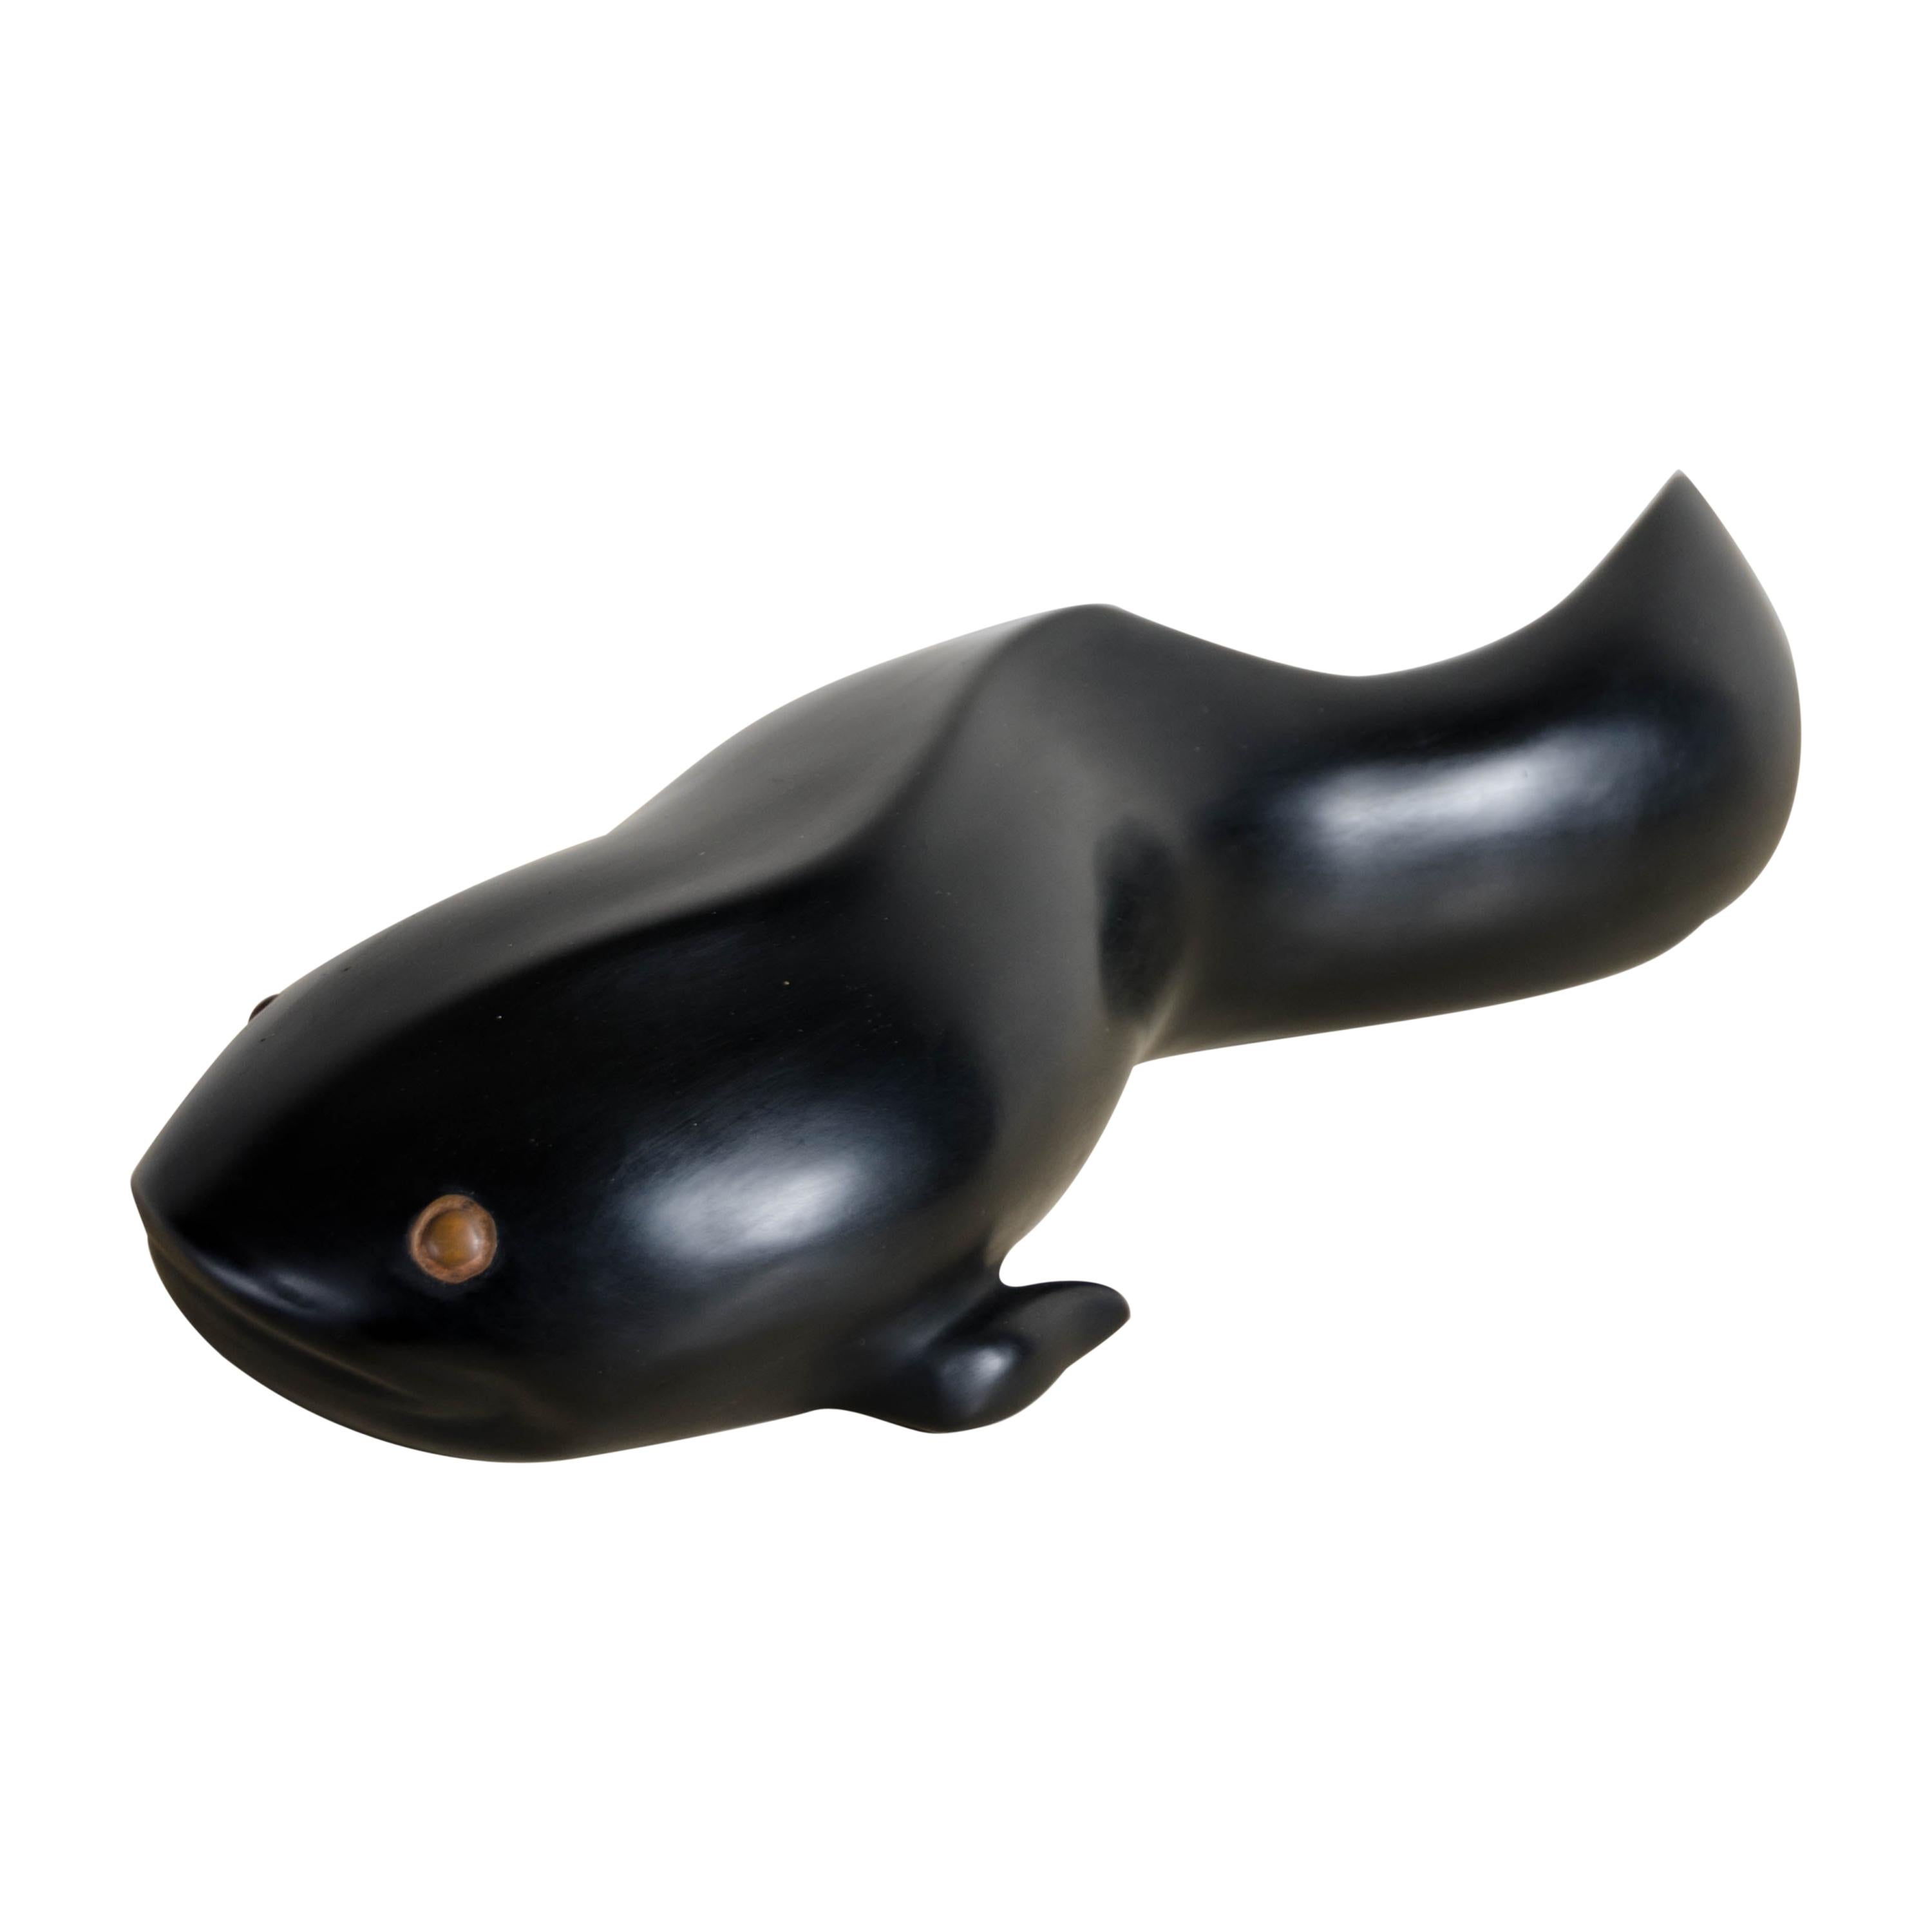 Catfish, Black Lacquer by Robert Kuo, Hand Repousse, Limited Edition For Sale